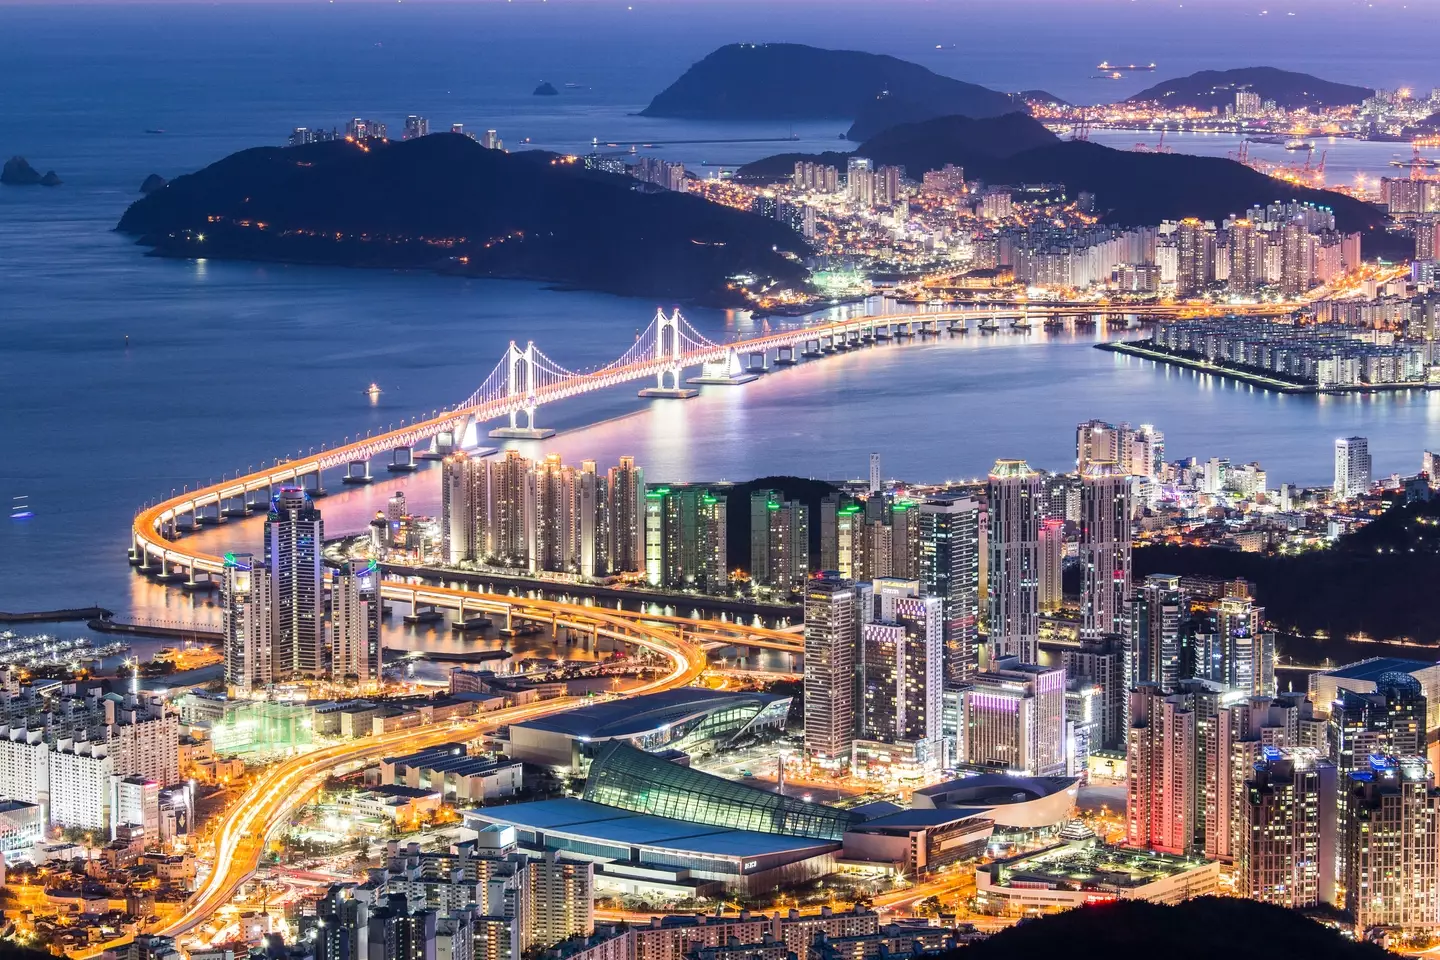 The unnamed victim was murdered in Busan, South Korea.